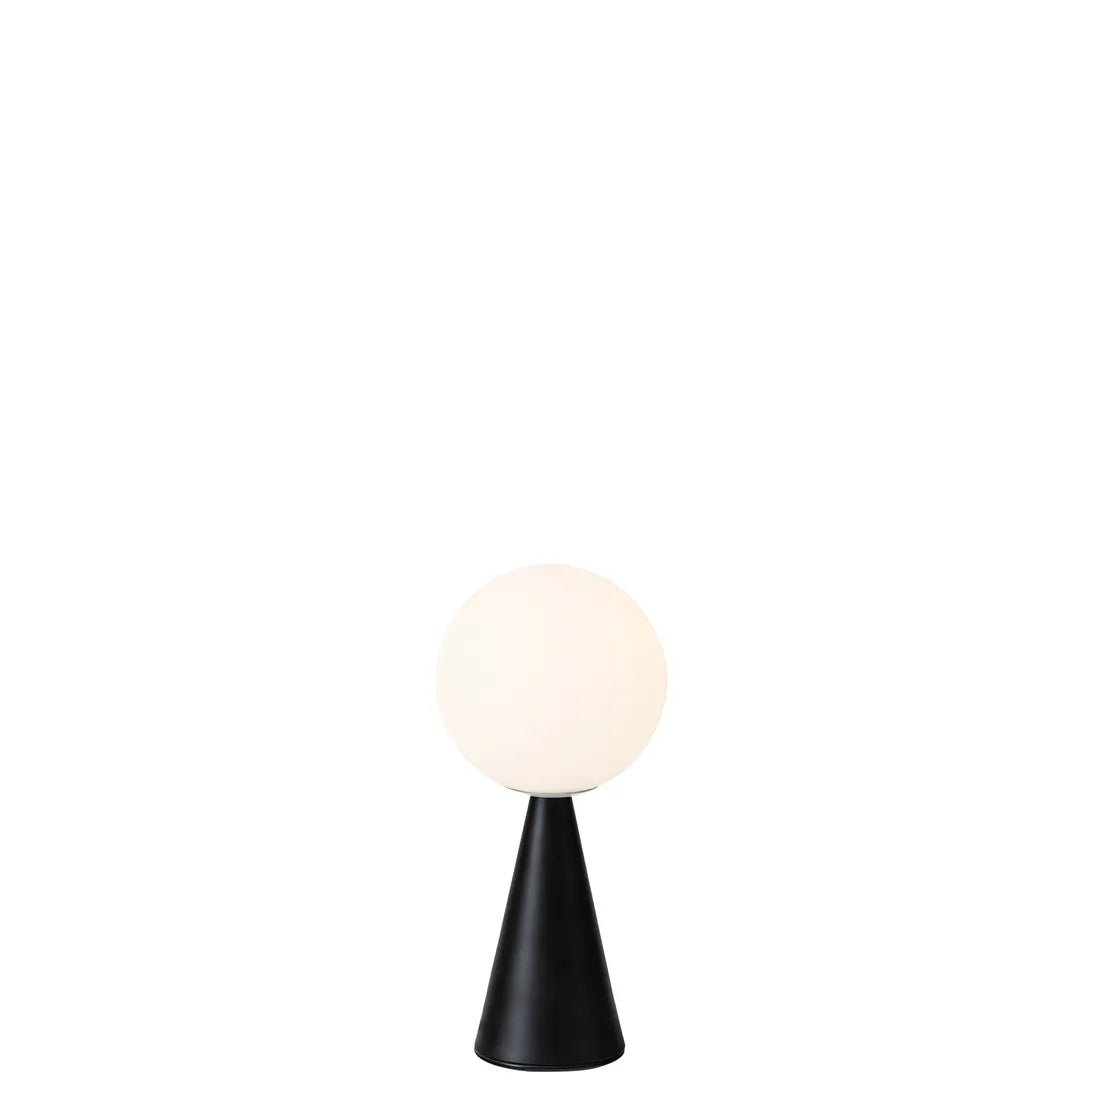 designer table lamps online, table lamps india, new mini lamps for living room black